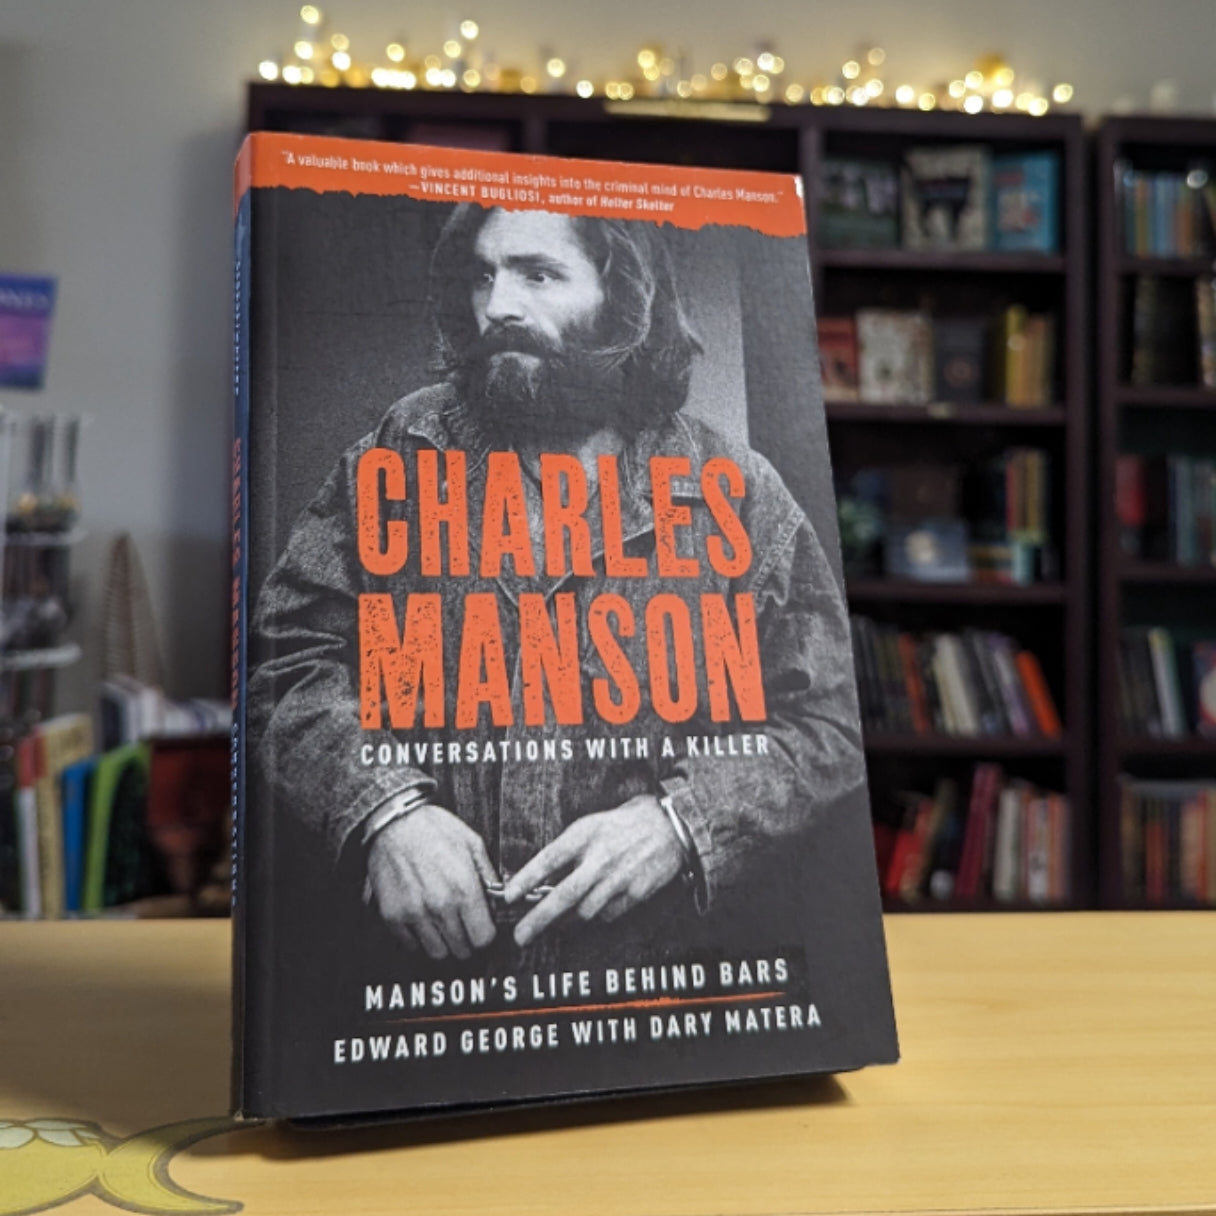 Charles Manson: Conversations with a Killer: Manson's Life Behind Bars (Volume 2)